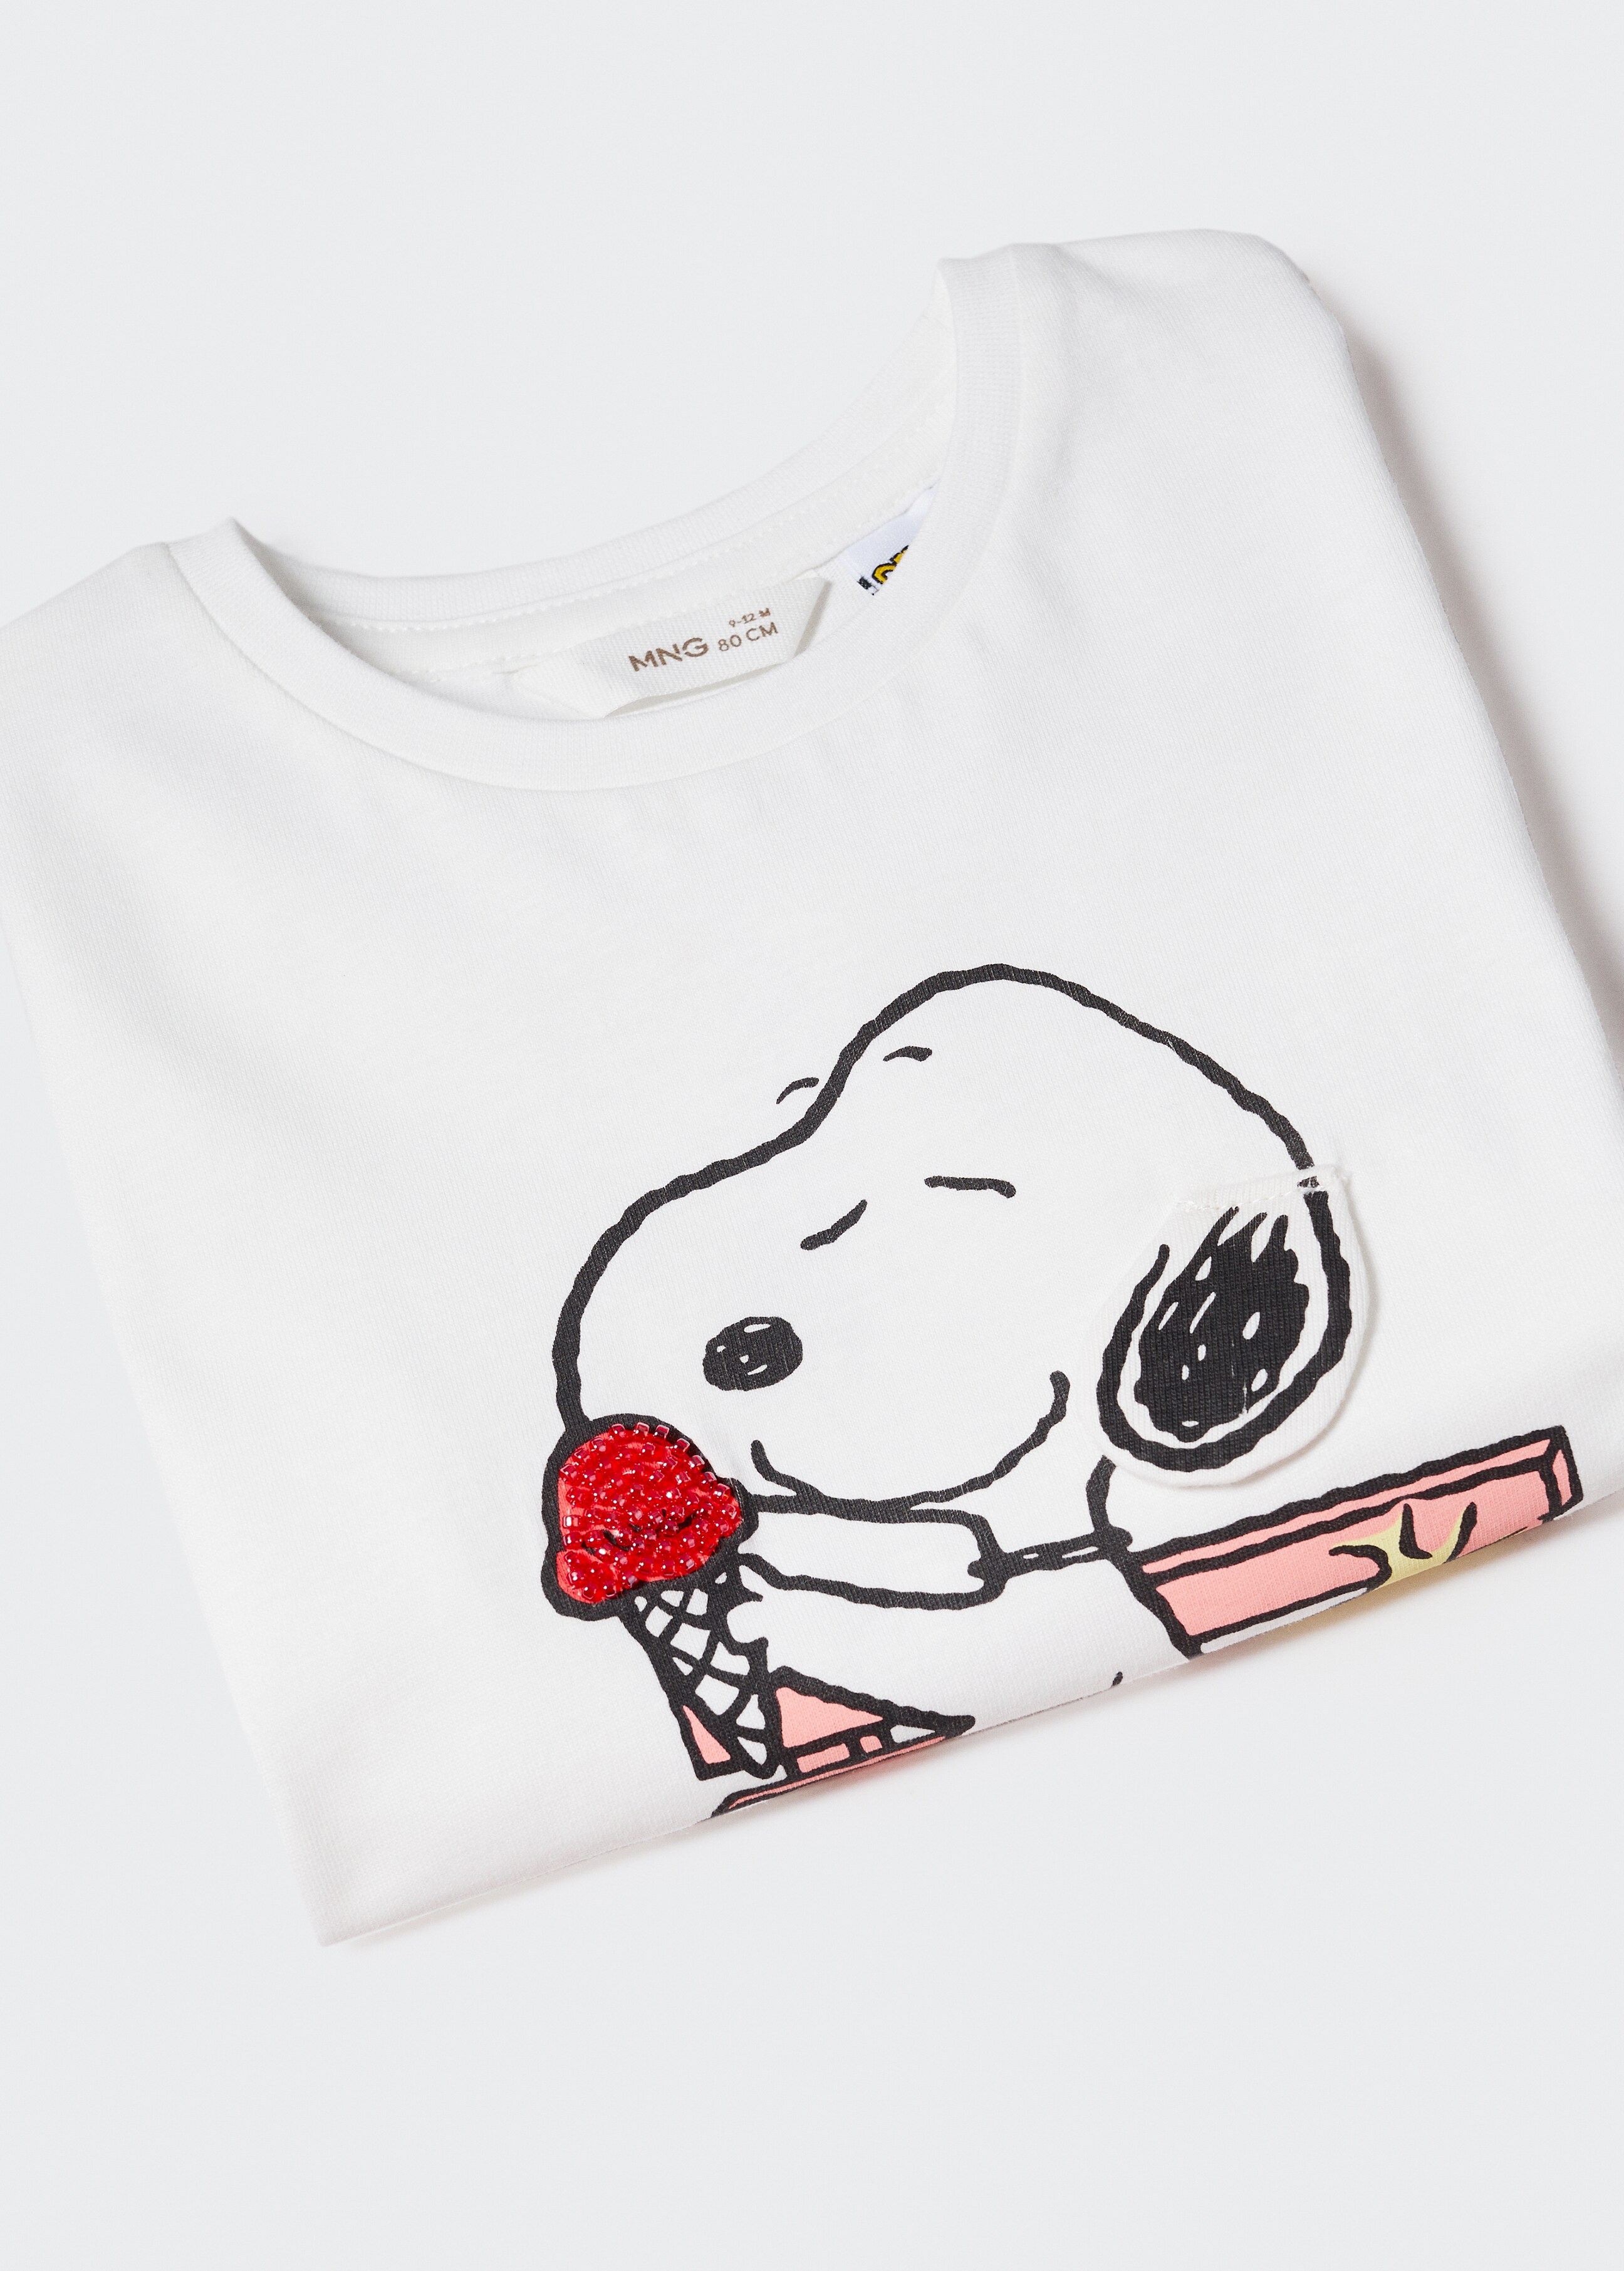 Snoopy printed t-shirt - Details of the article 8